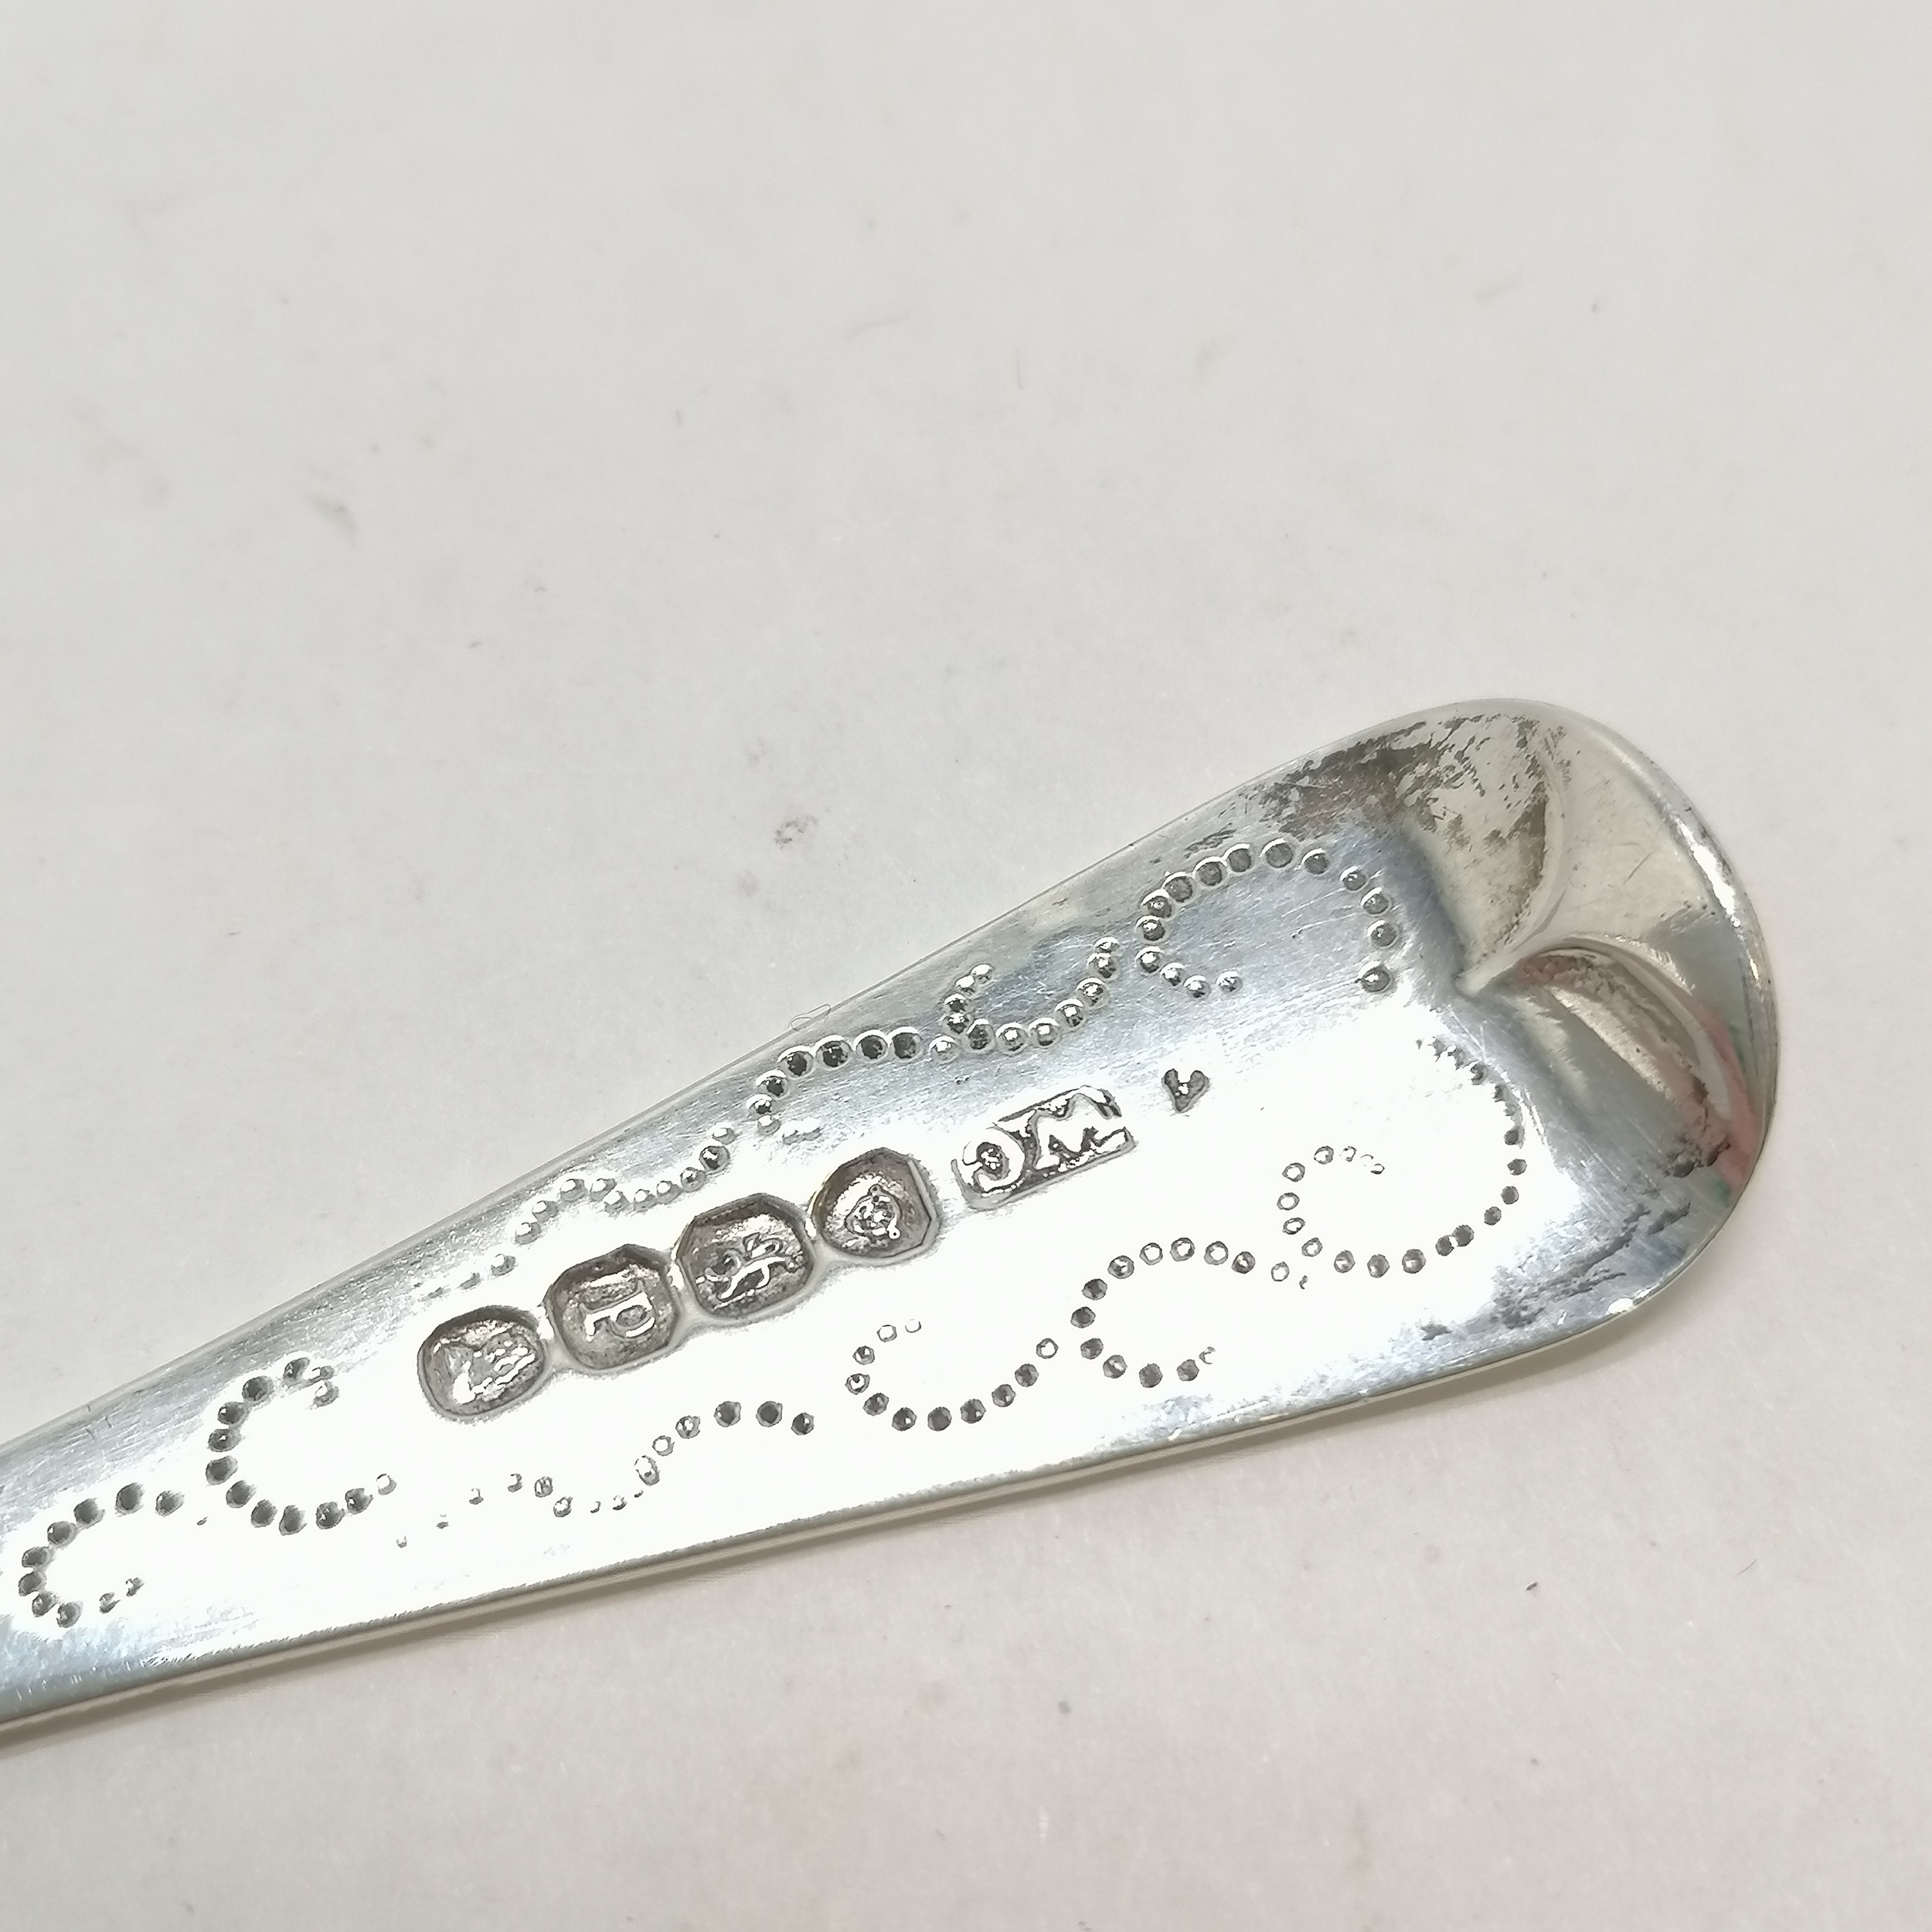 1830 silver sifting spoon with embossed & pierced detail to bowl which is in the form of a flower - Image 2 of 4